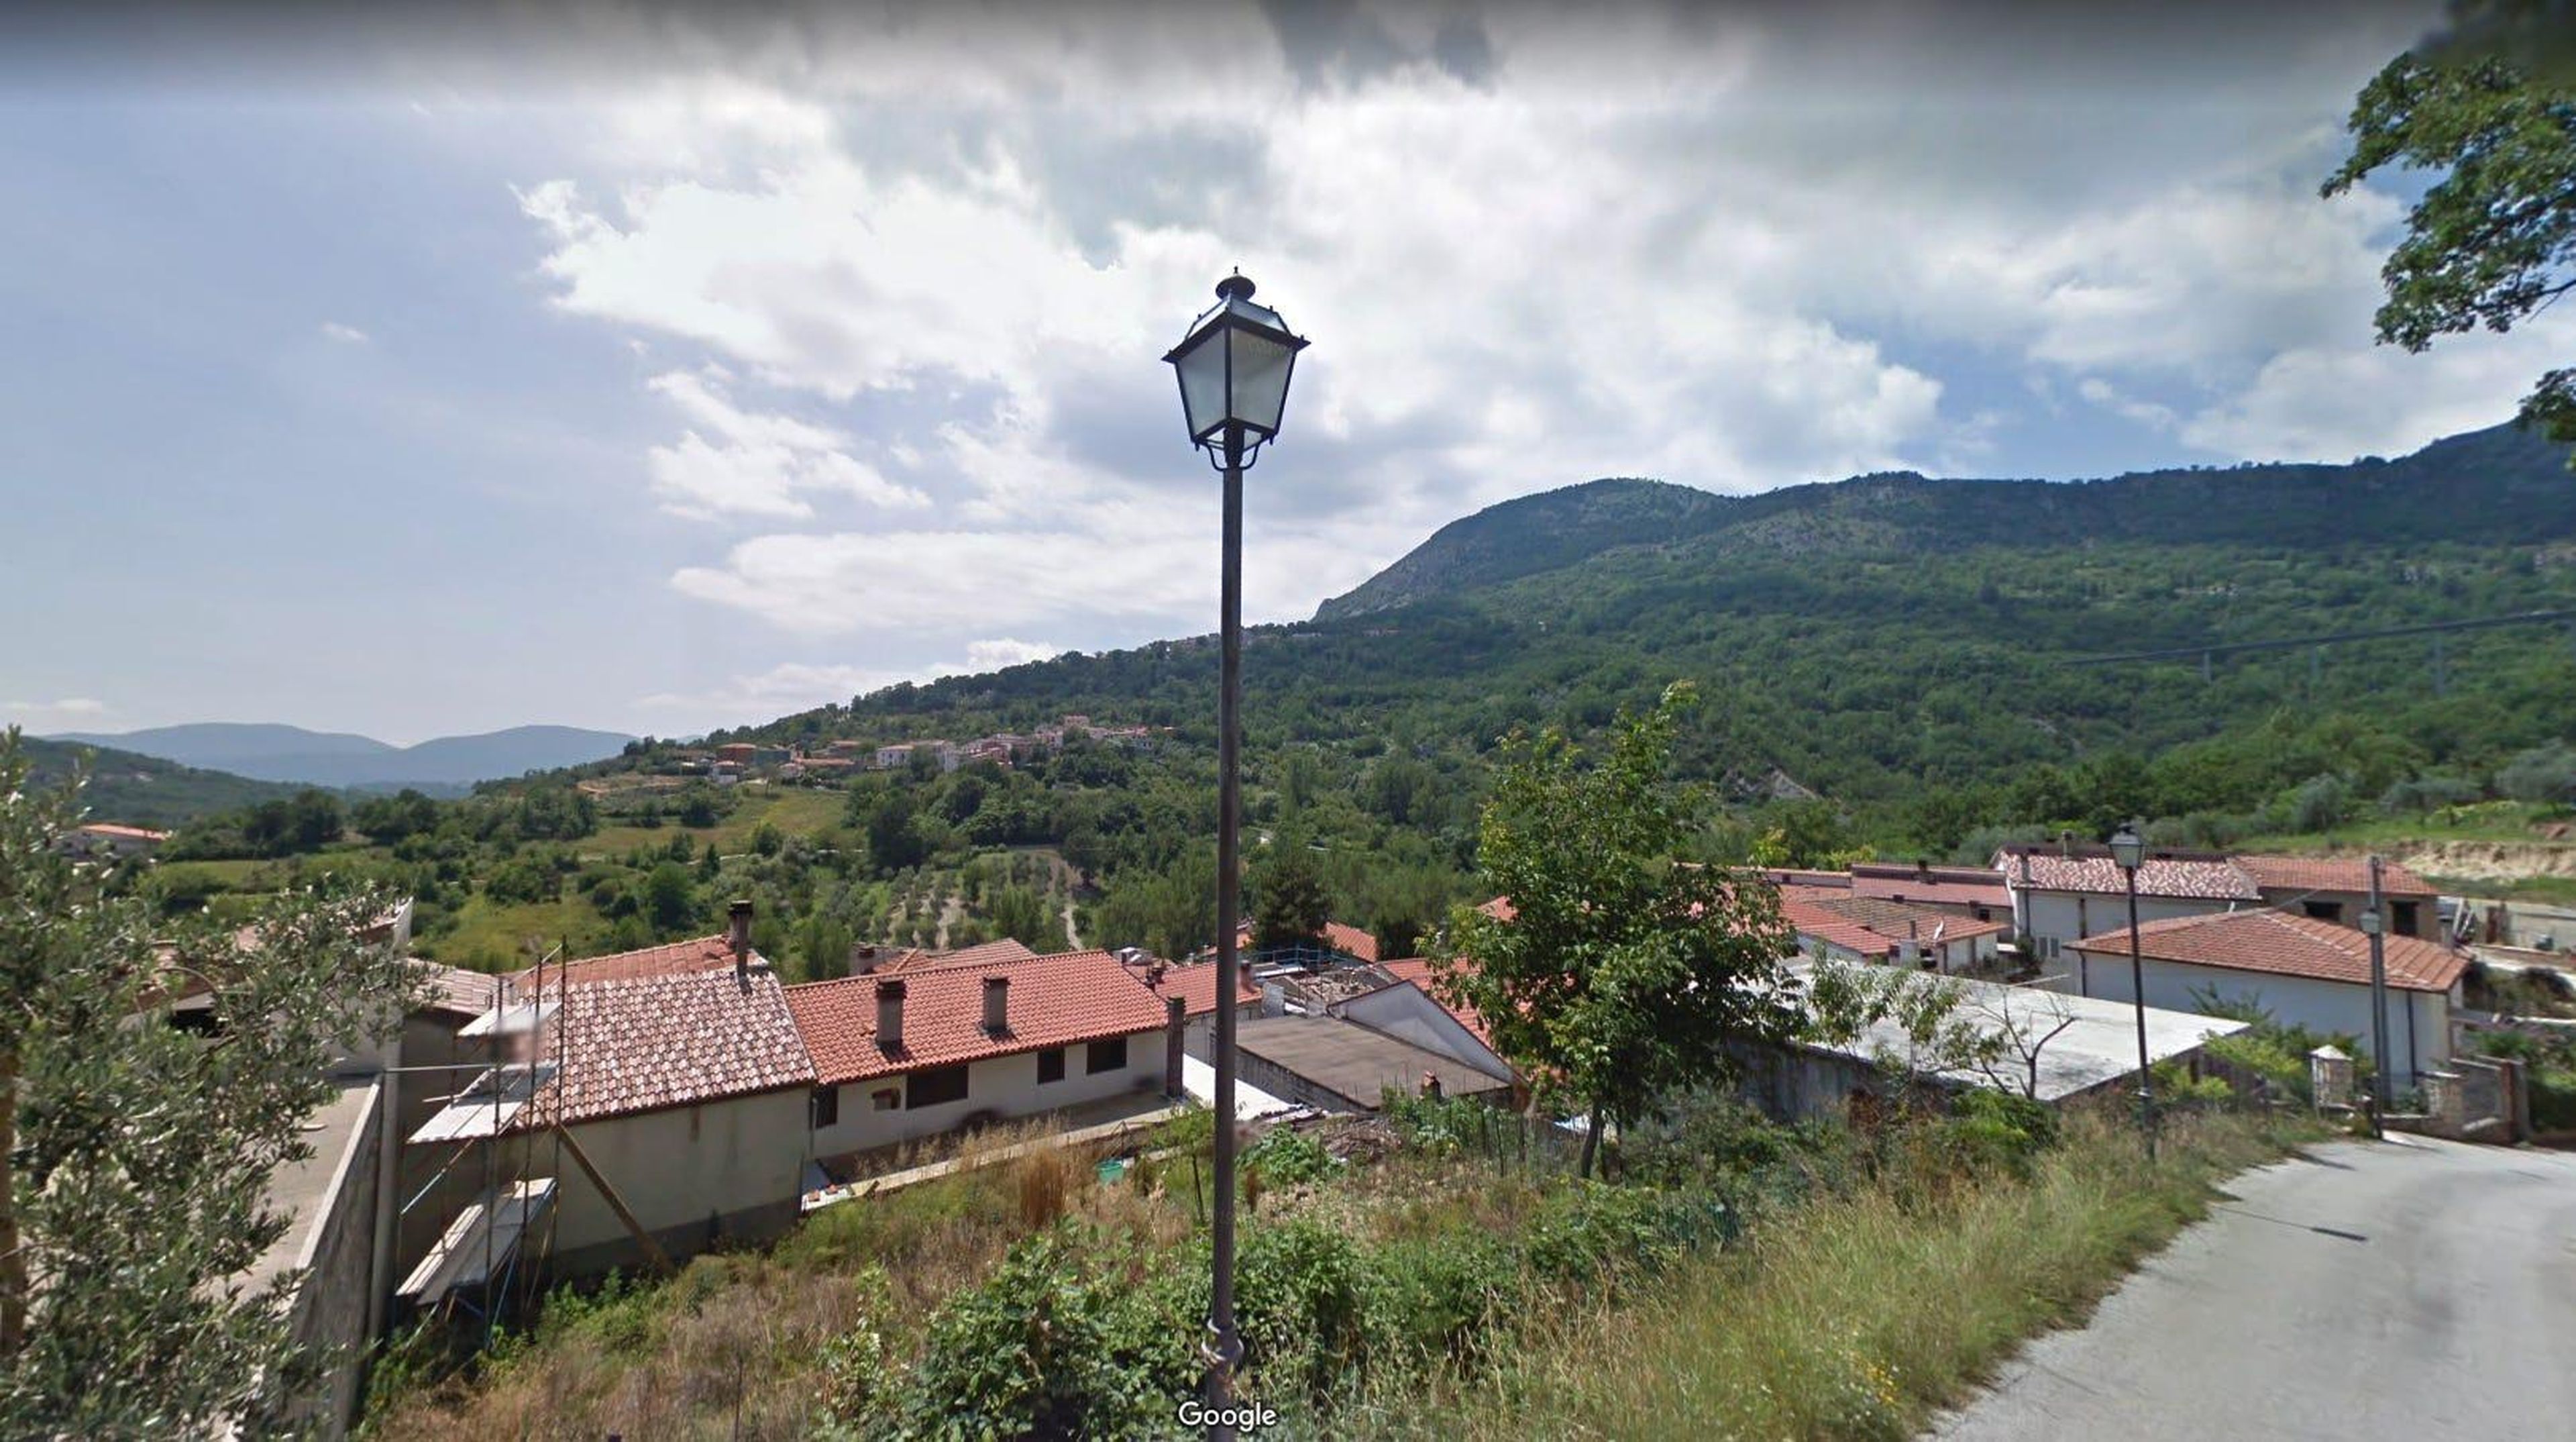 The village is surrounded by beautiful scenery. Google Maps